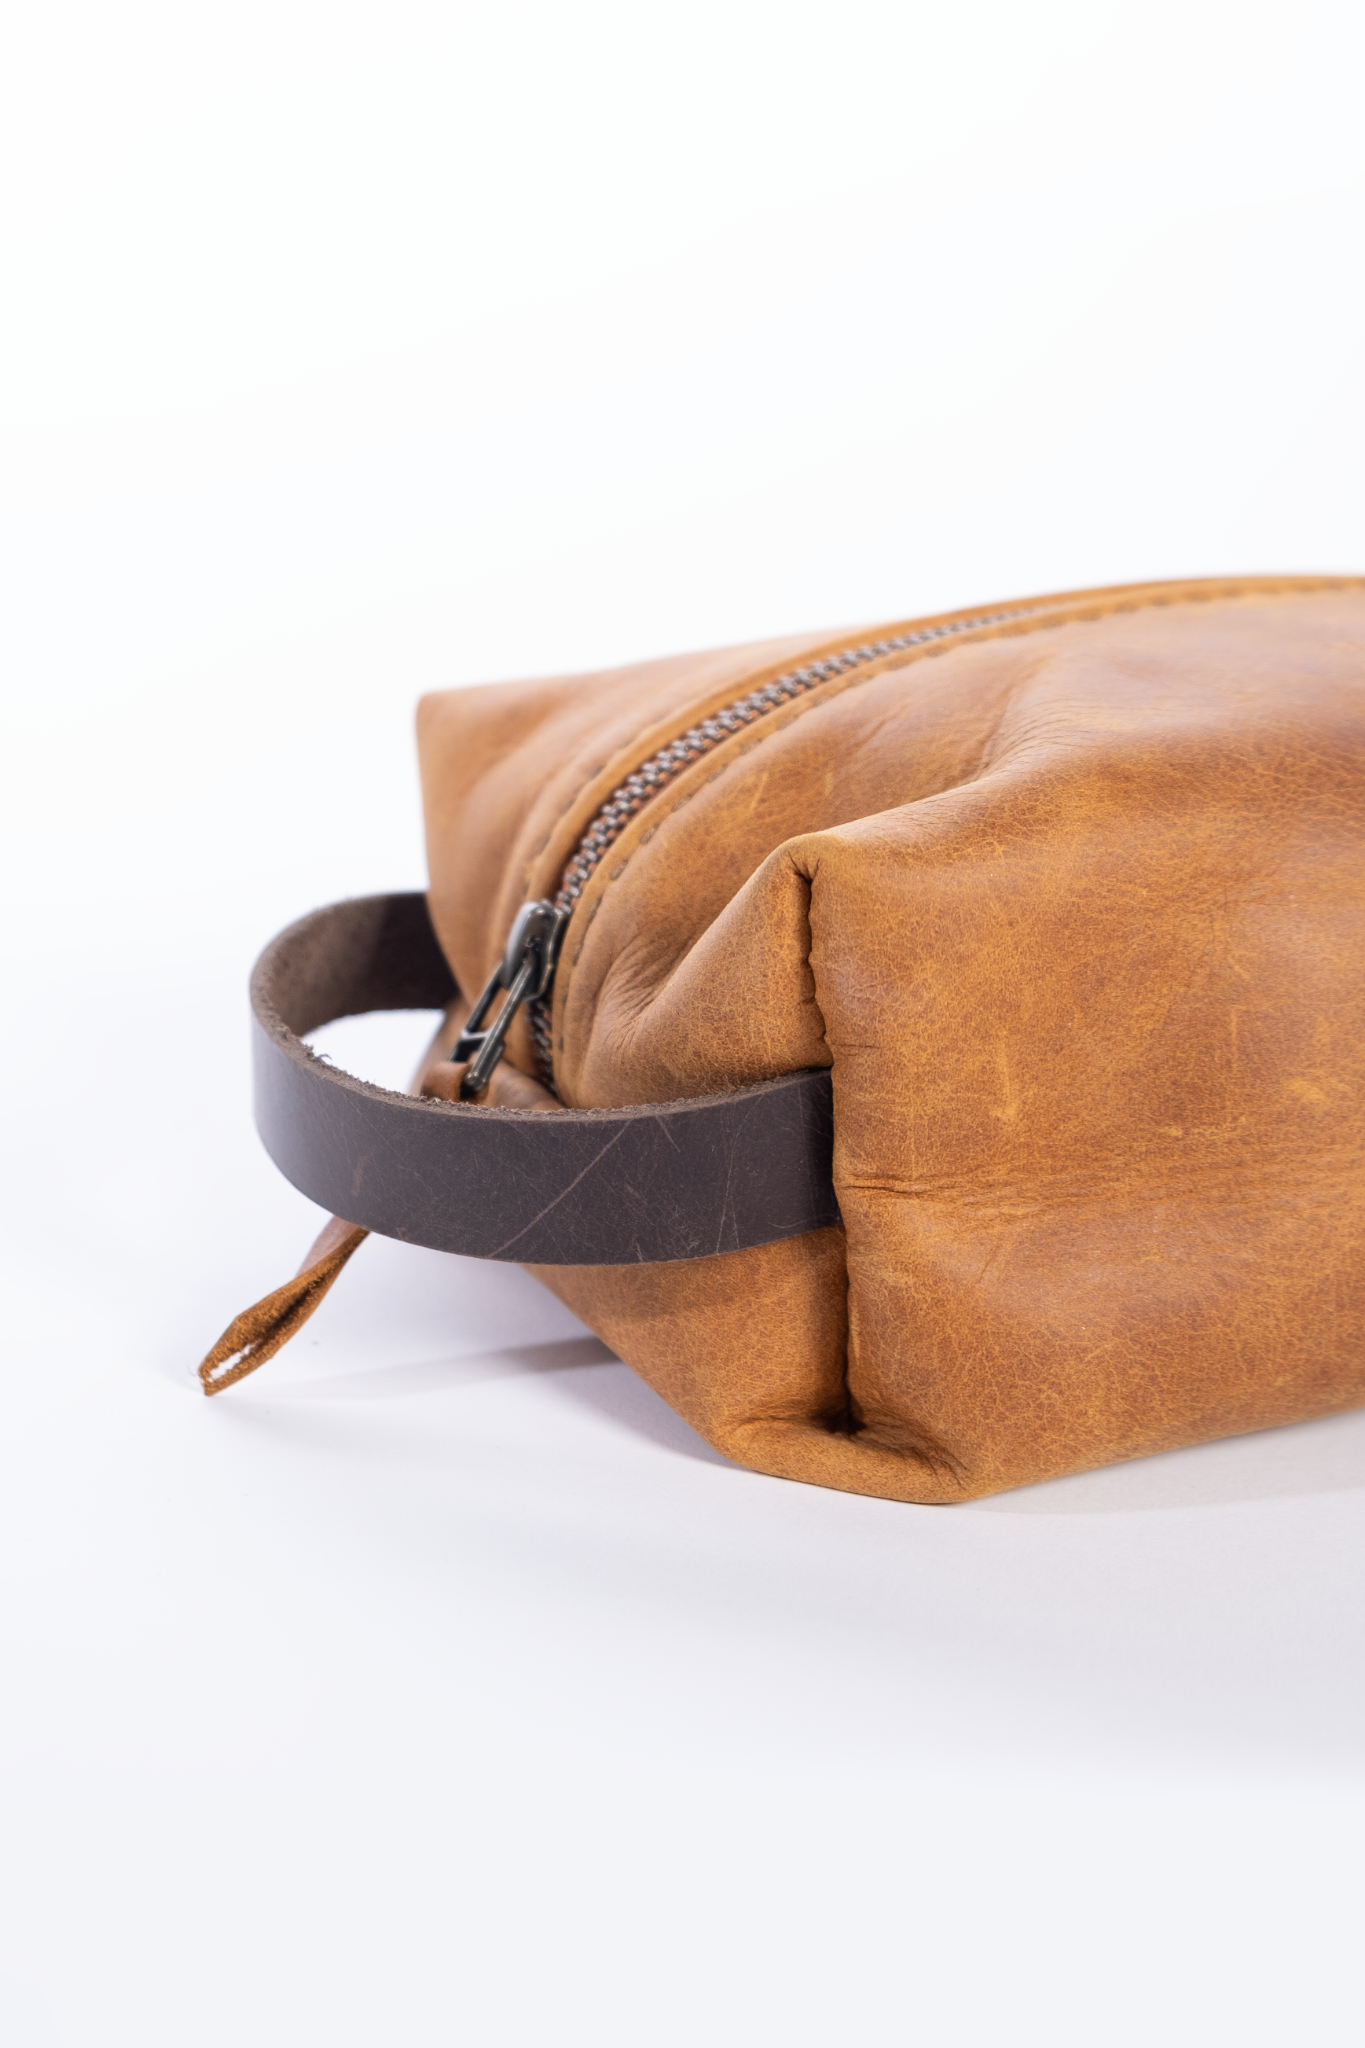 Tan Leather Toiletry Bag